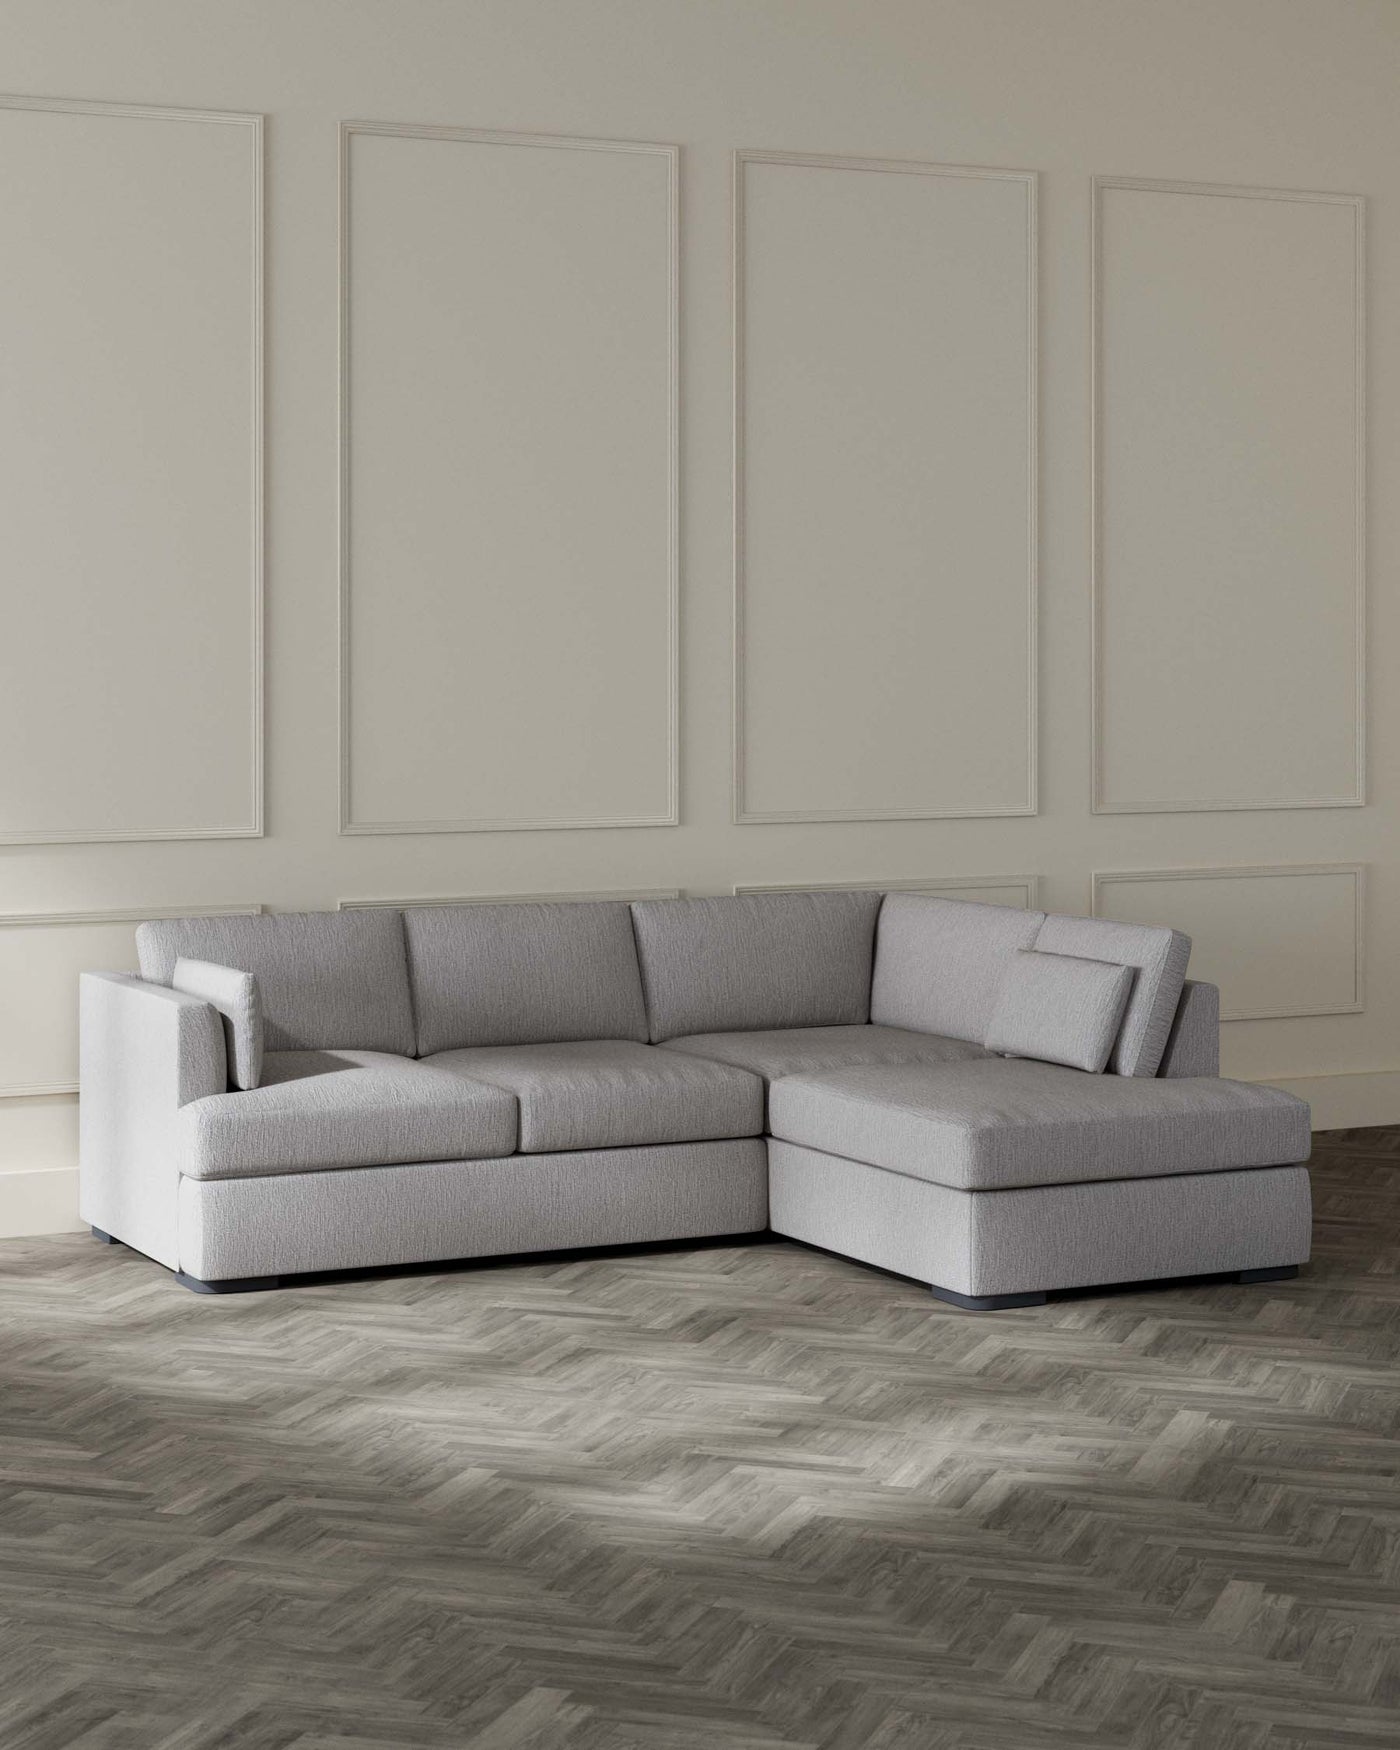 Modern light grey sectional sofa with clean lines and a minimalist aesthetic, featuring a chaise lounge extension, set against a neutral interior with decorative wall panels and herringbone wood flooring.